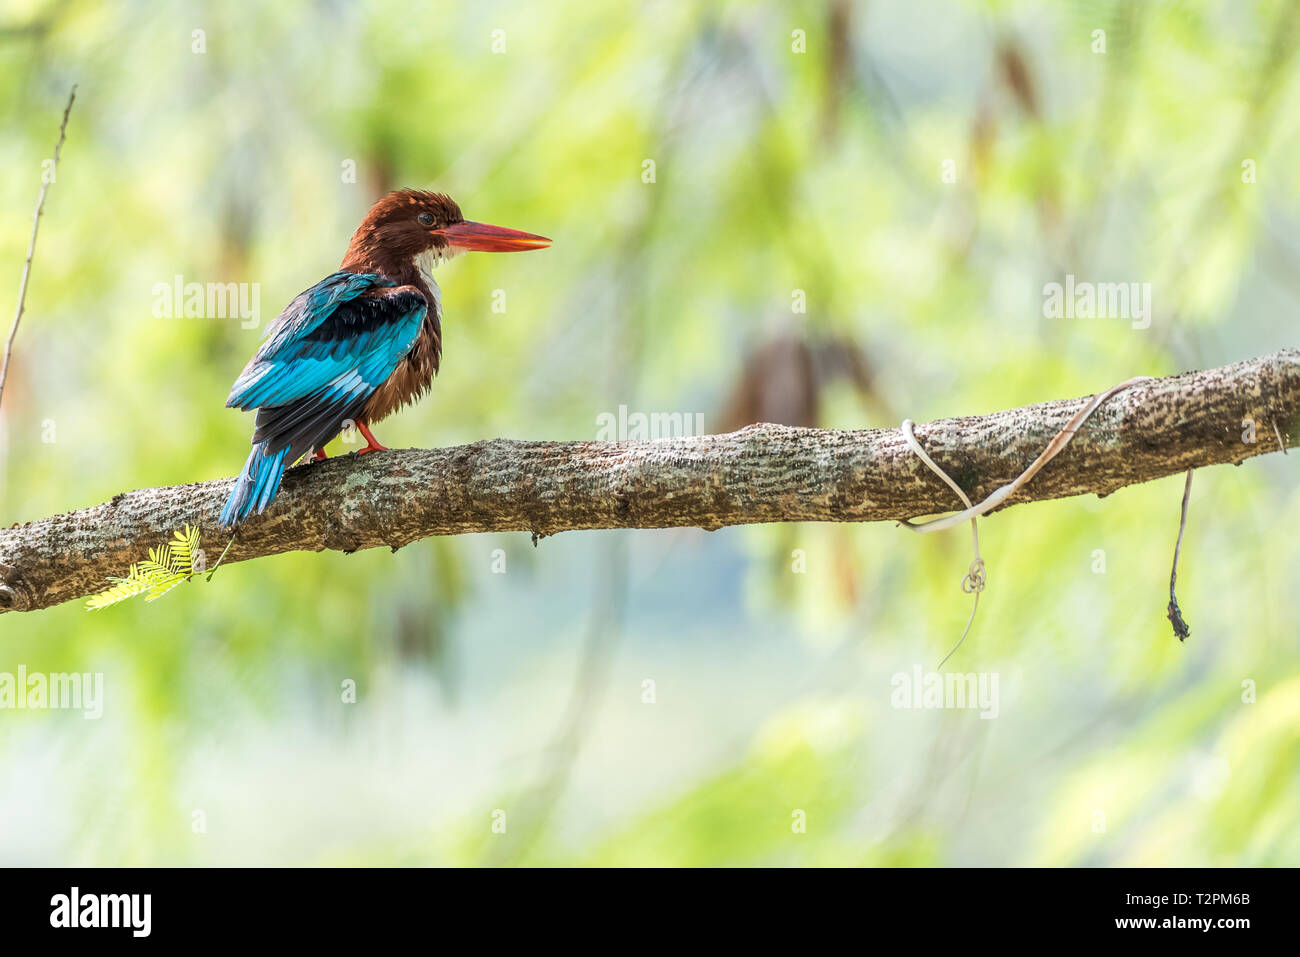 White Throated king fisher perched and posture Stock Photo